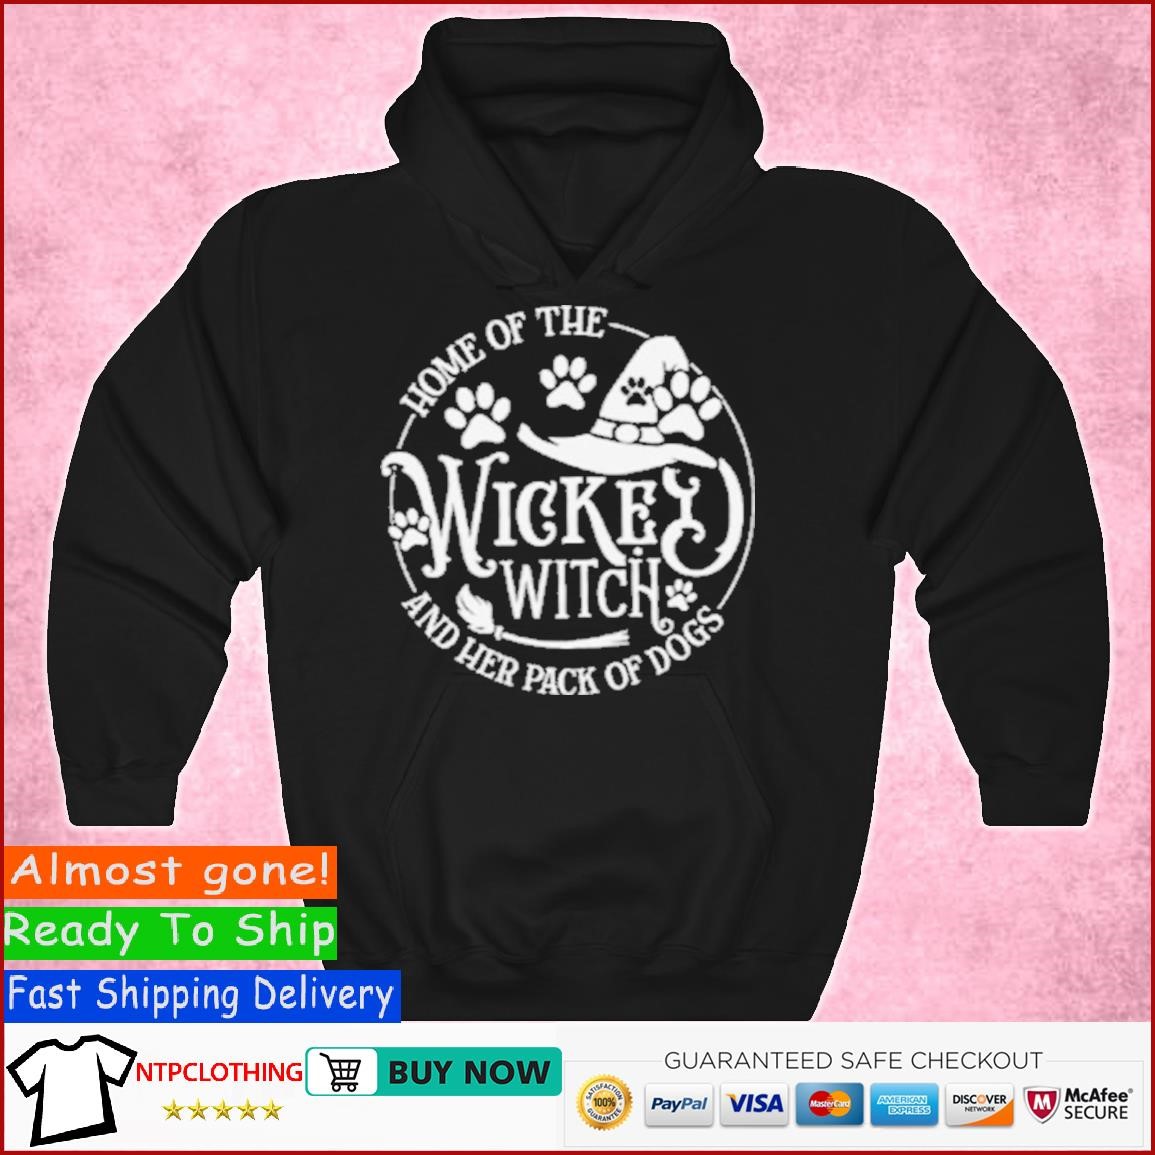 Halloween Home Of The Wicked Witch And Her Pack Of Dogs T Shirt Hoodie.jpg